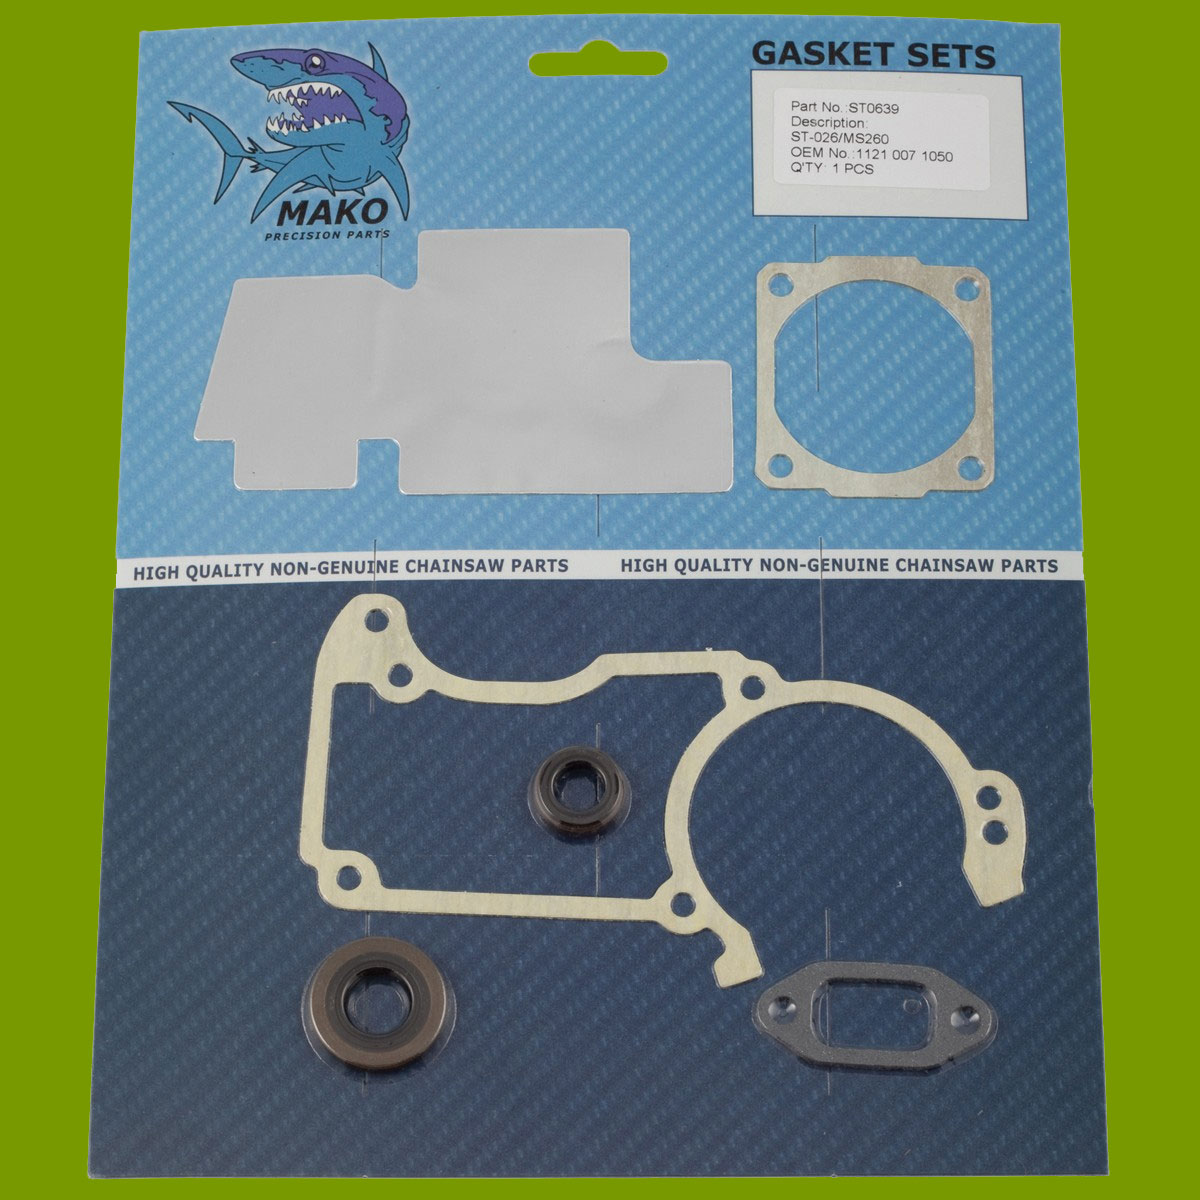 (image for) Stihl Gasket Set for 026 and MS260 1121 029 0500, ST0639